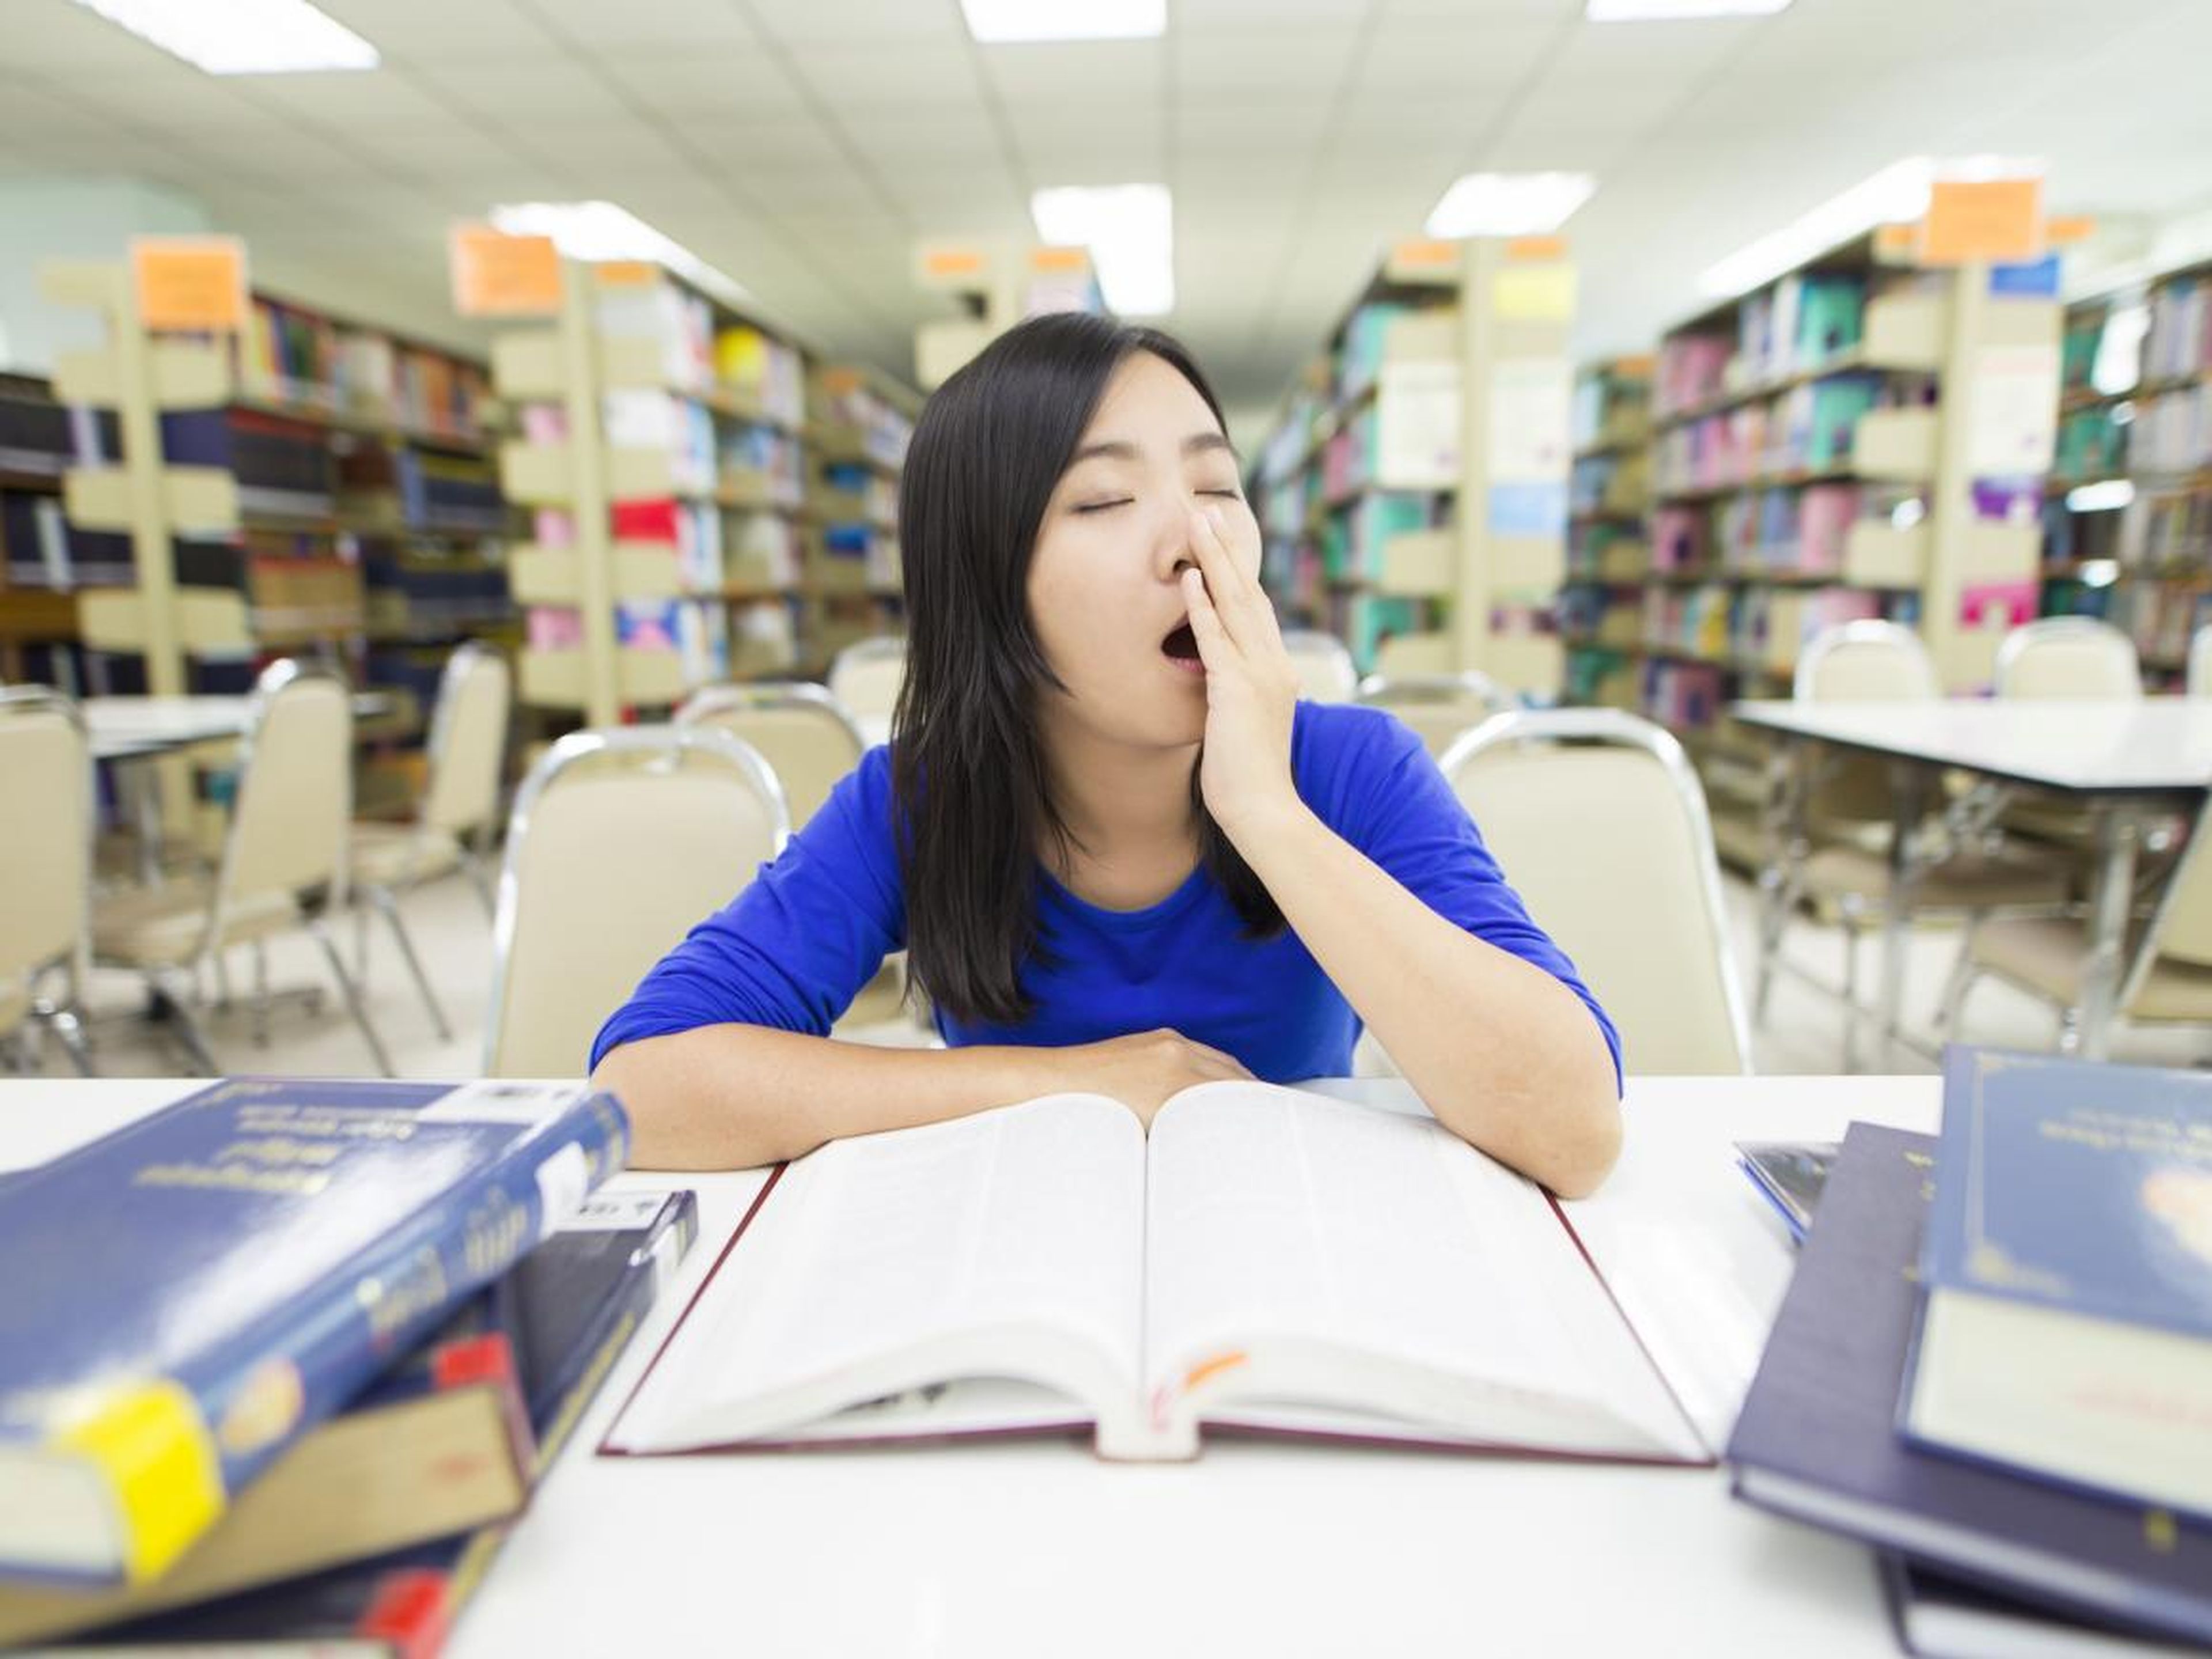 Being sleepy makes it harder to learn and disrupts short-term memory.